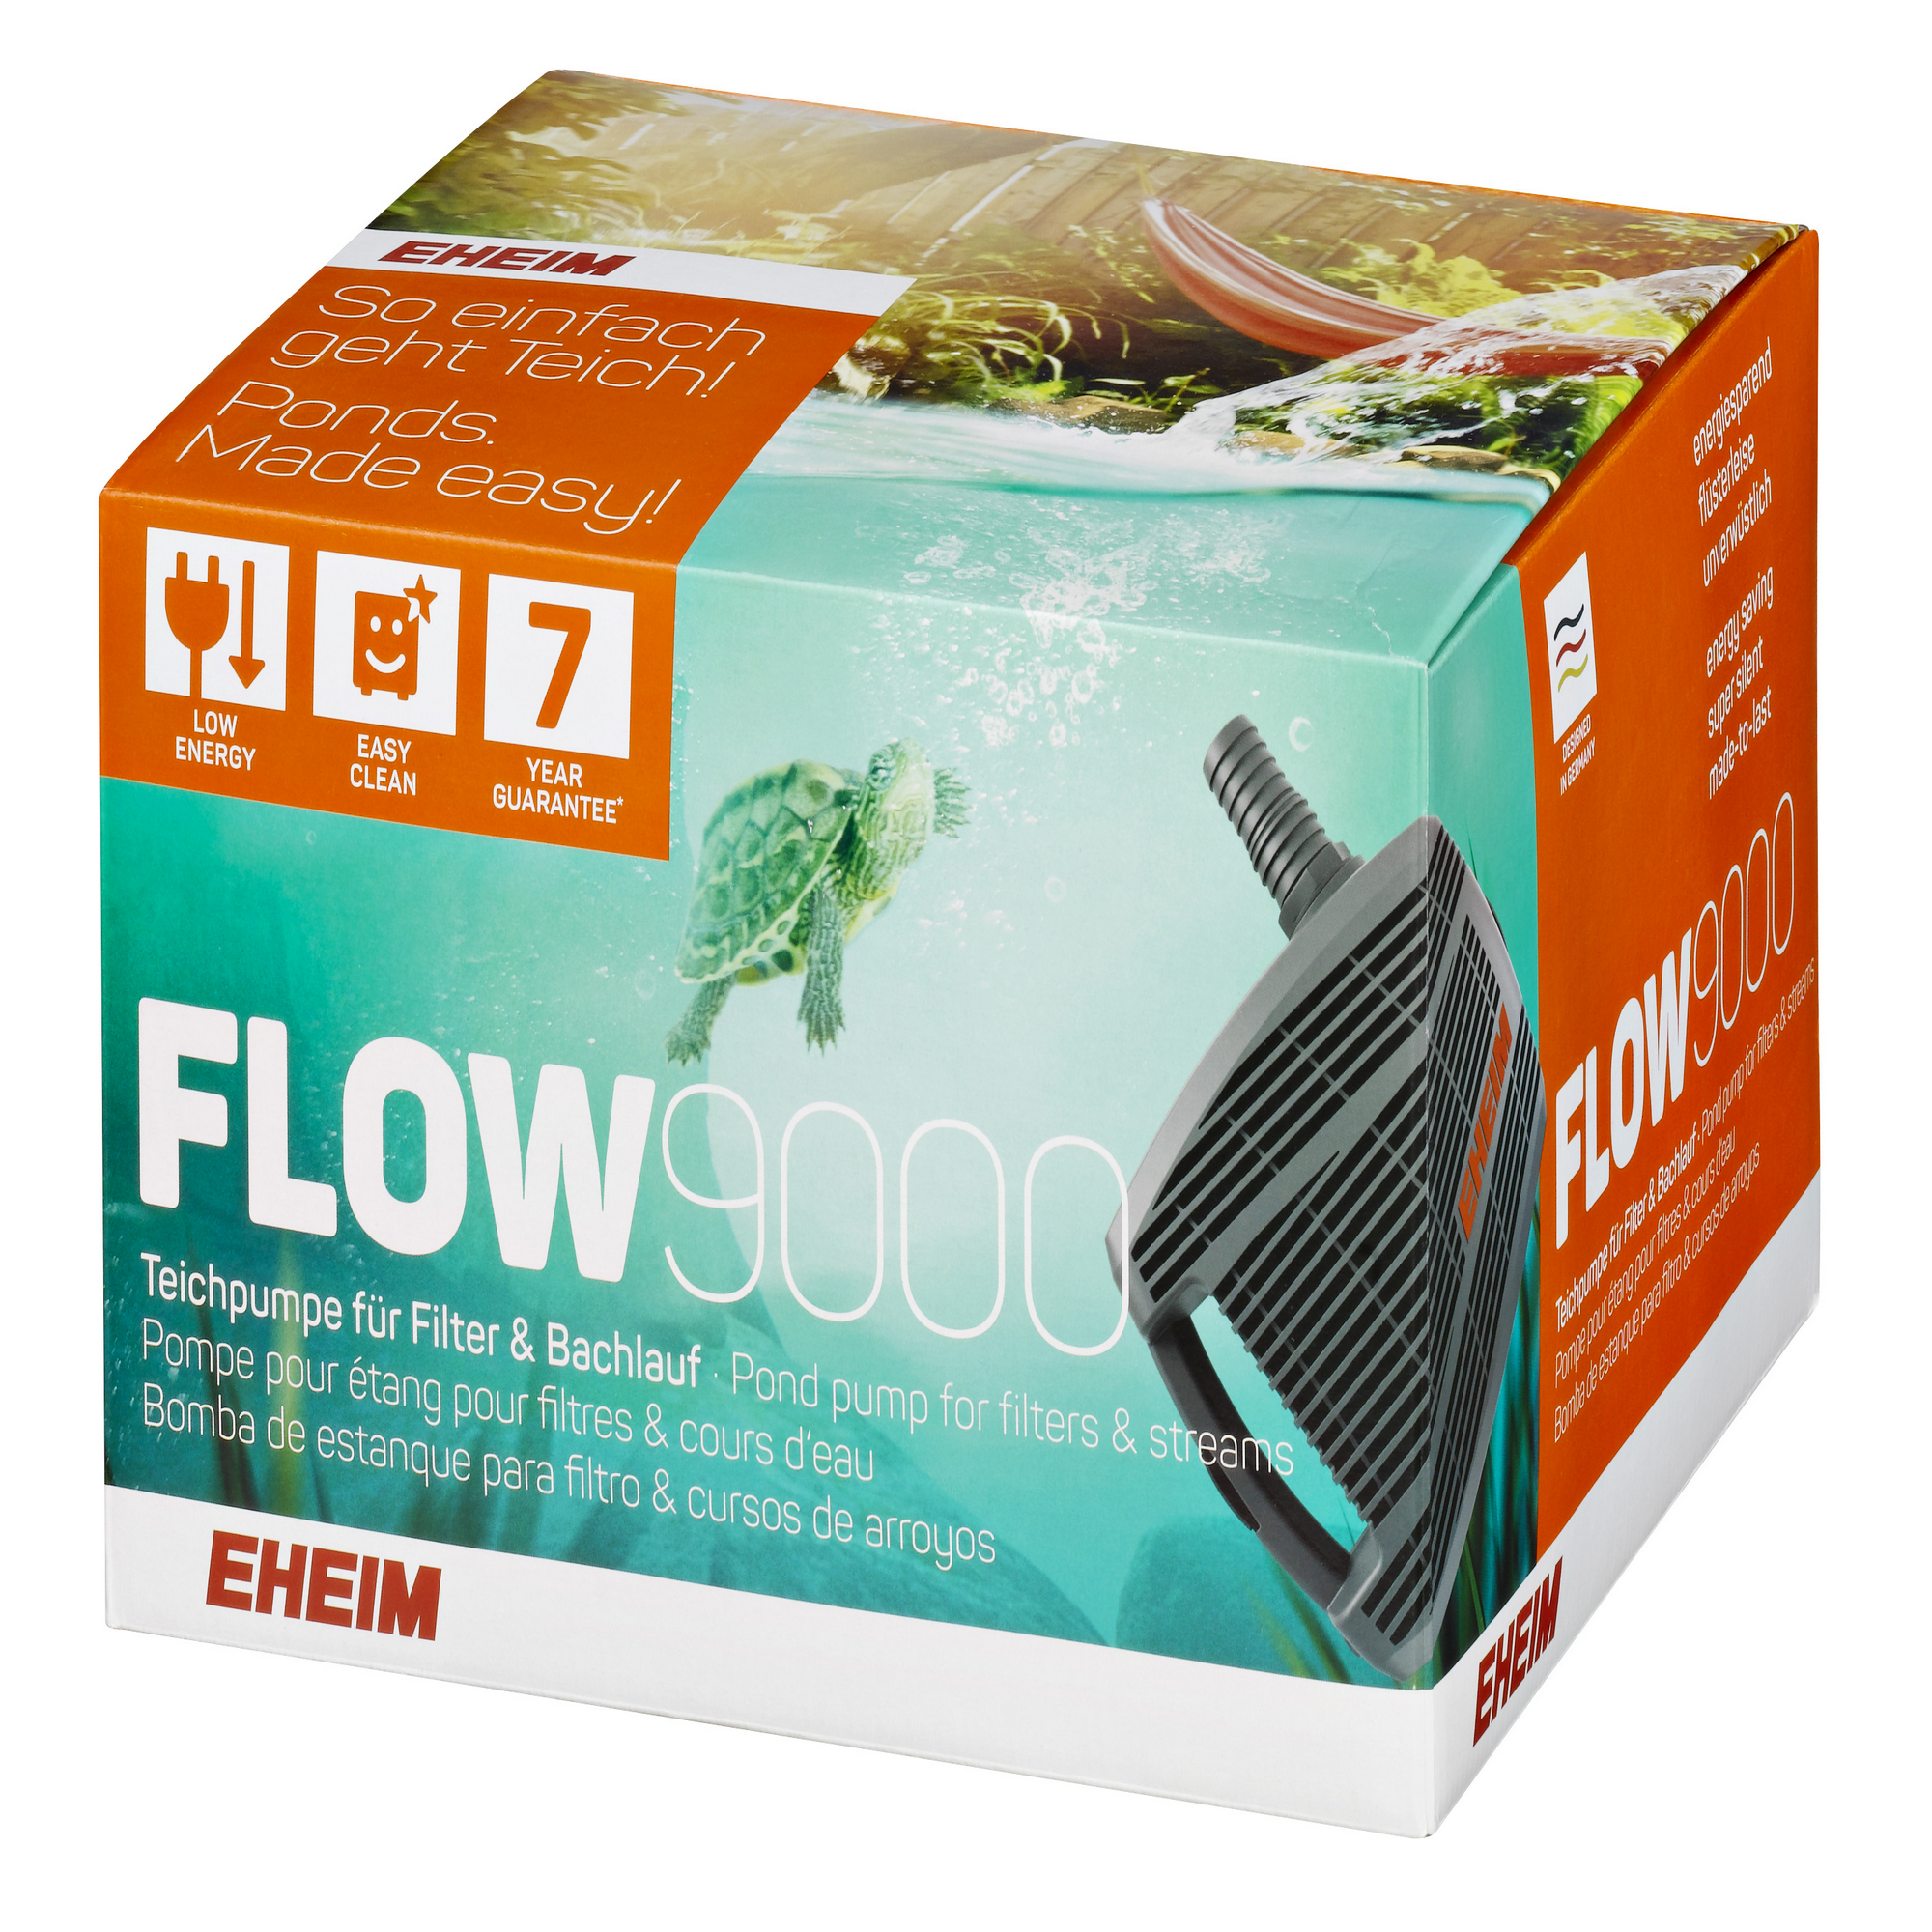 FLOW 9000 Teichpumpe + product picture